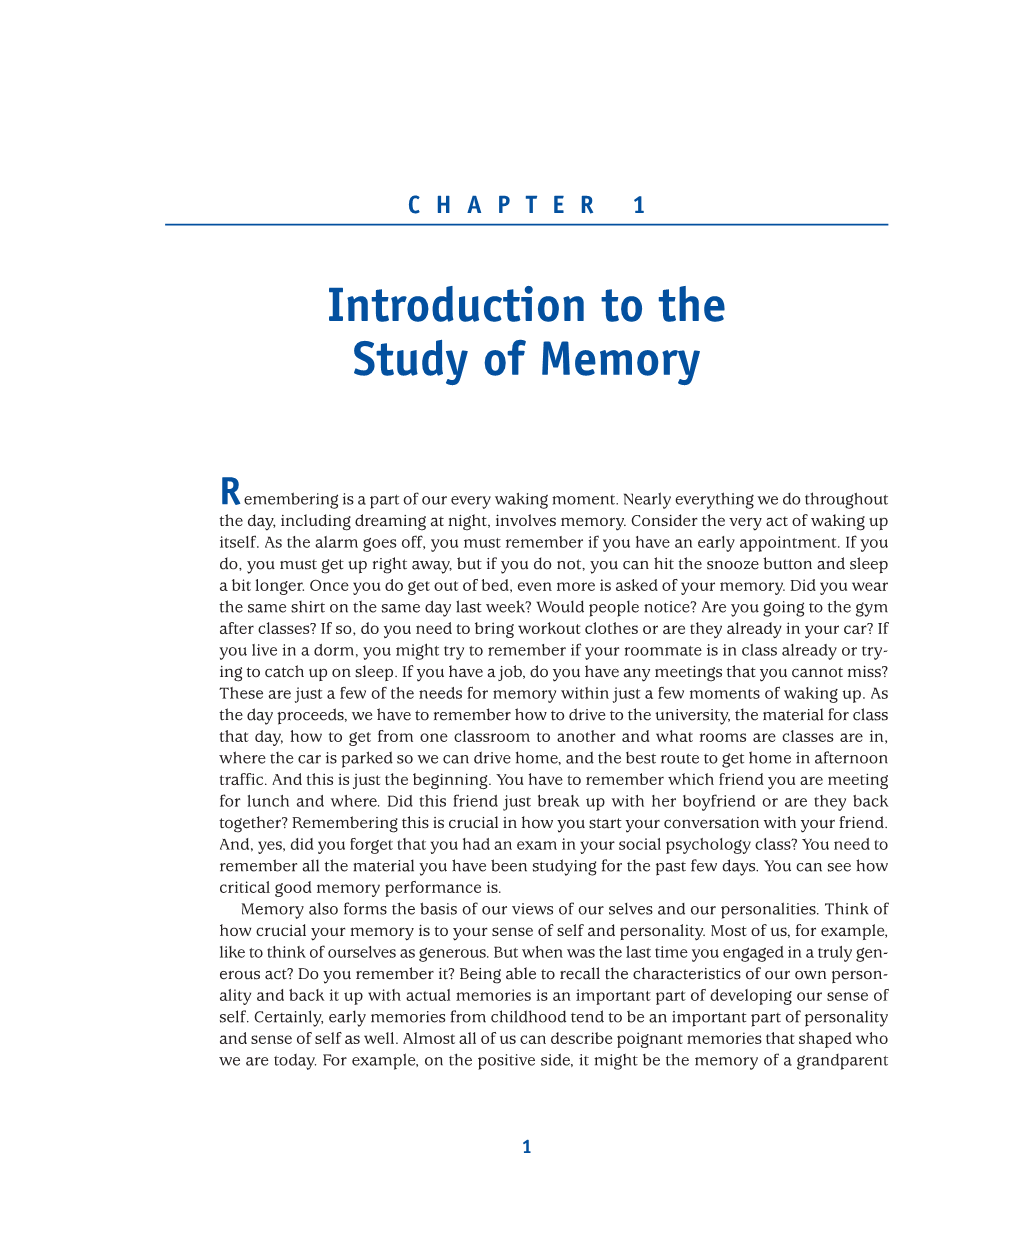 Introduction to the Study of Memory